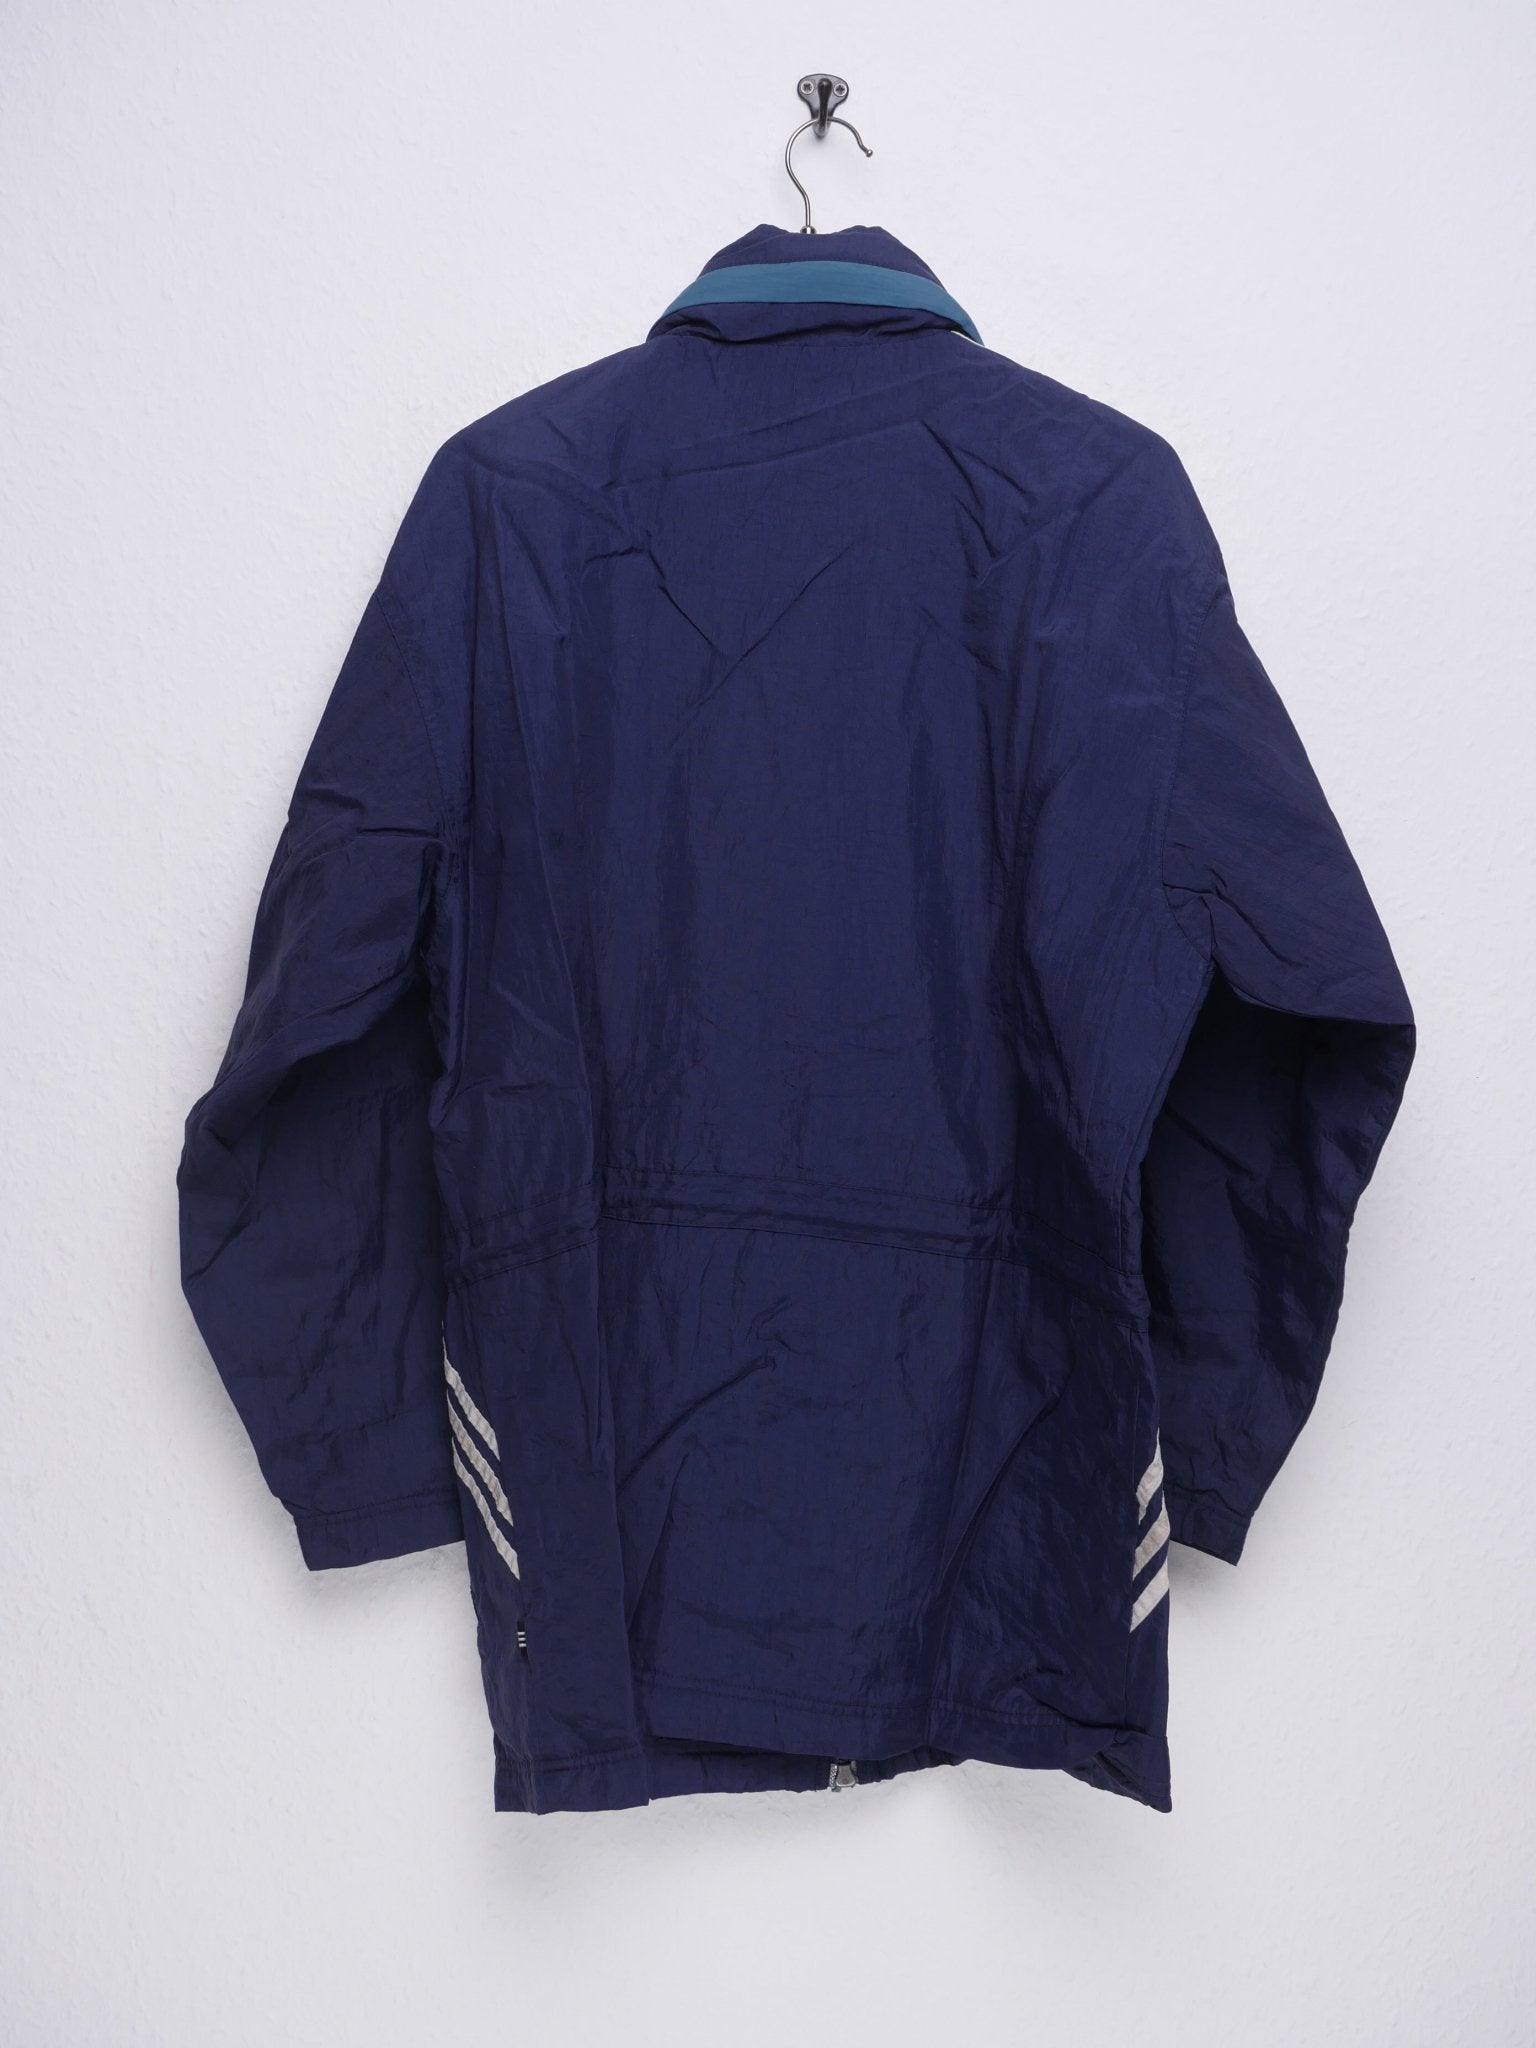 Adidas embroidered Spellout Vintage Heavy Jacke - Peeces